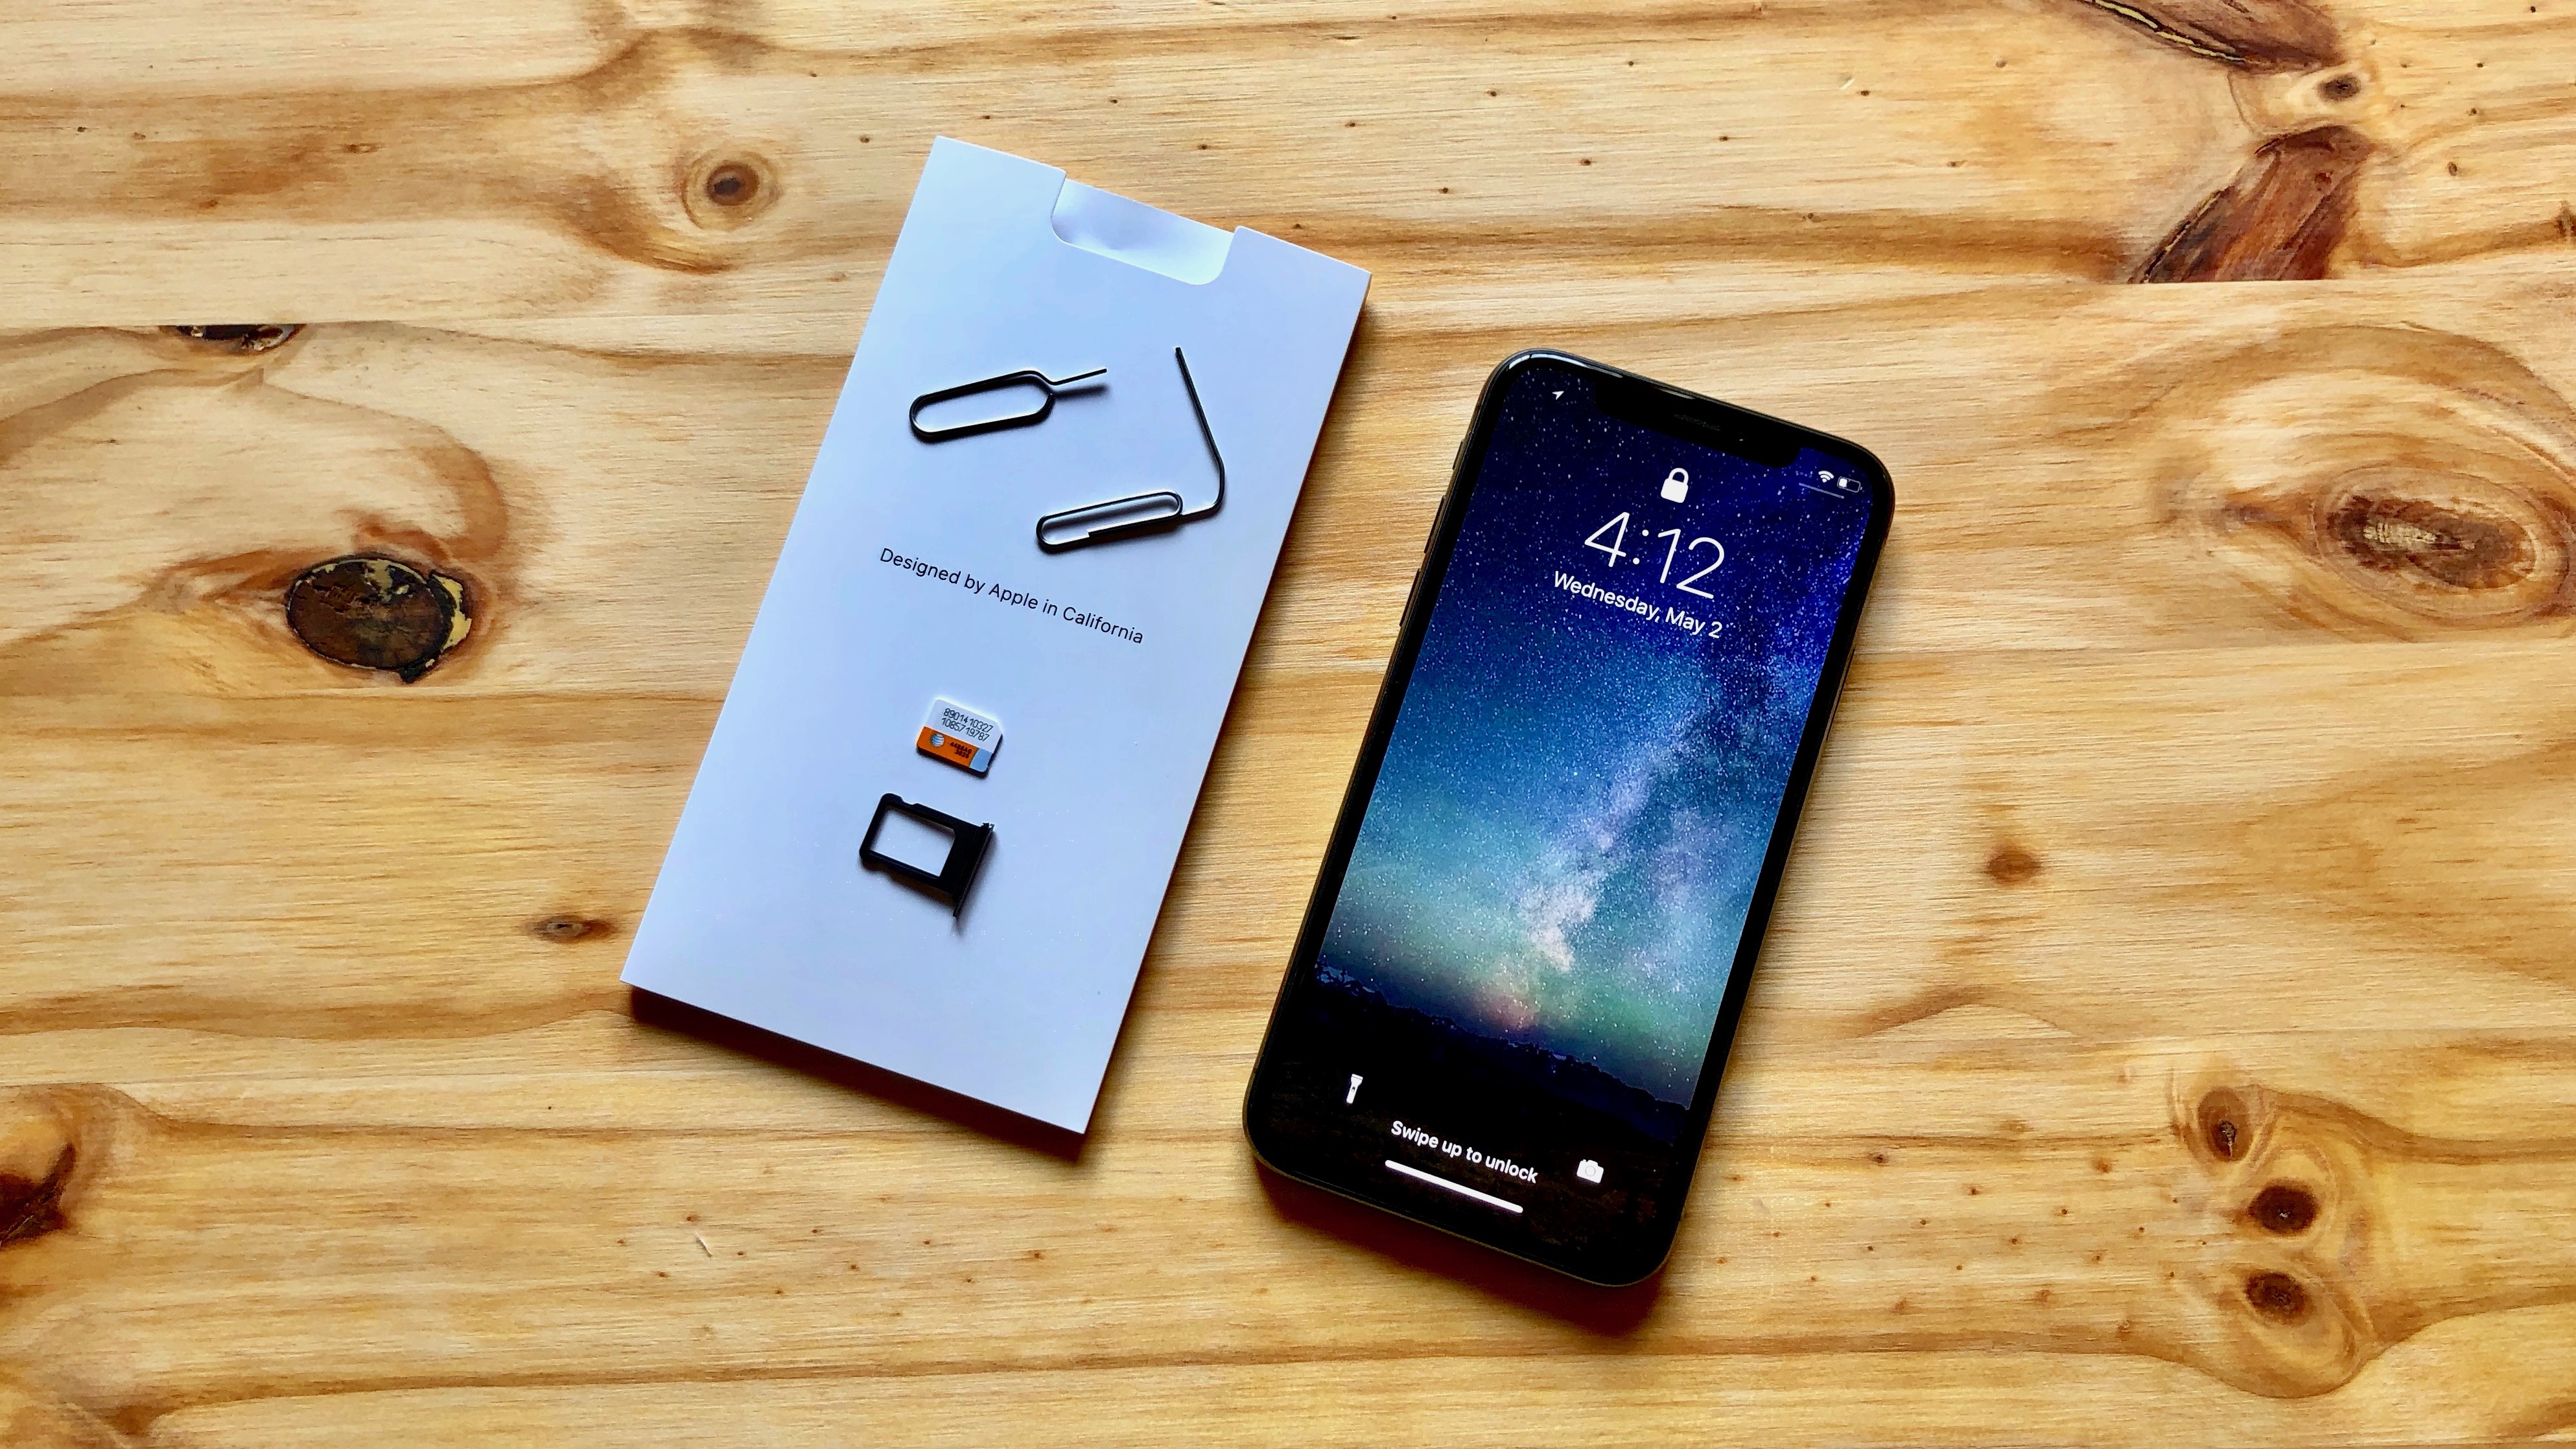 Ios 12 Beta 5 Further Hints At Dual Sim Support Coming To Future Iphone Models 9to5mac